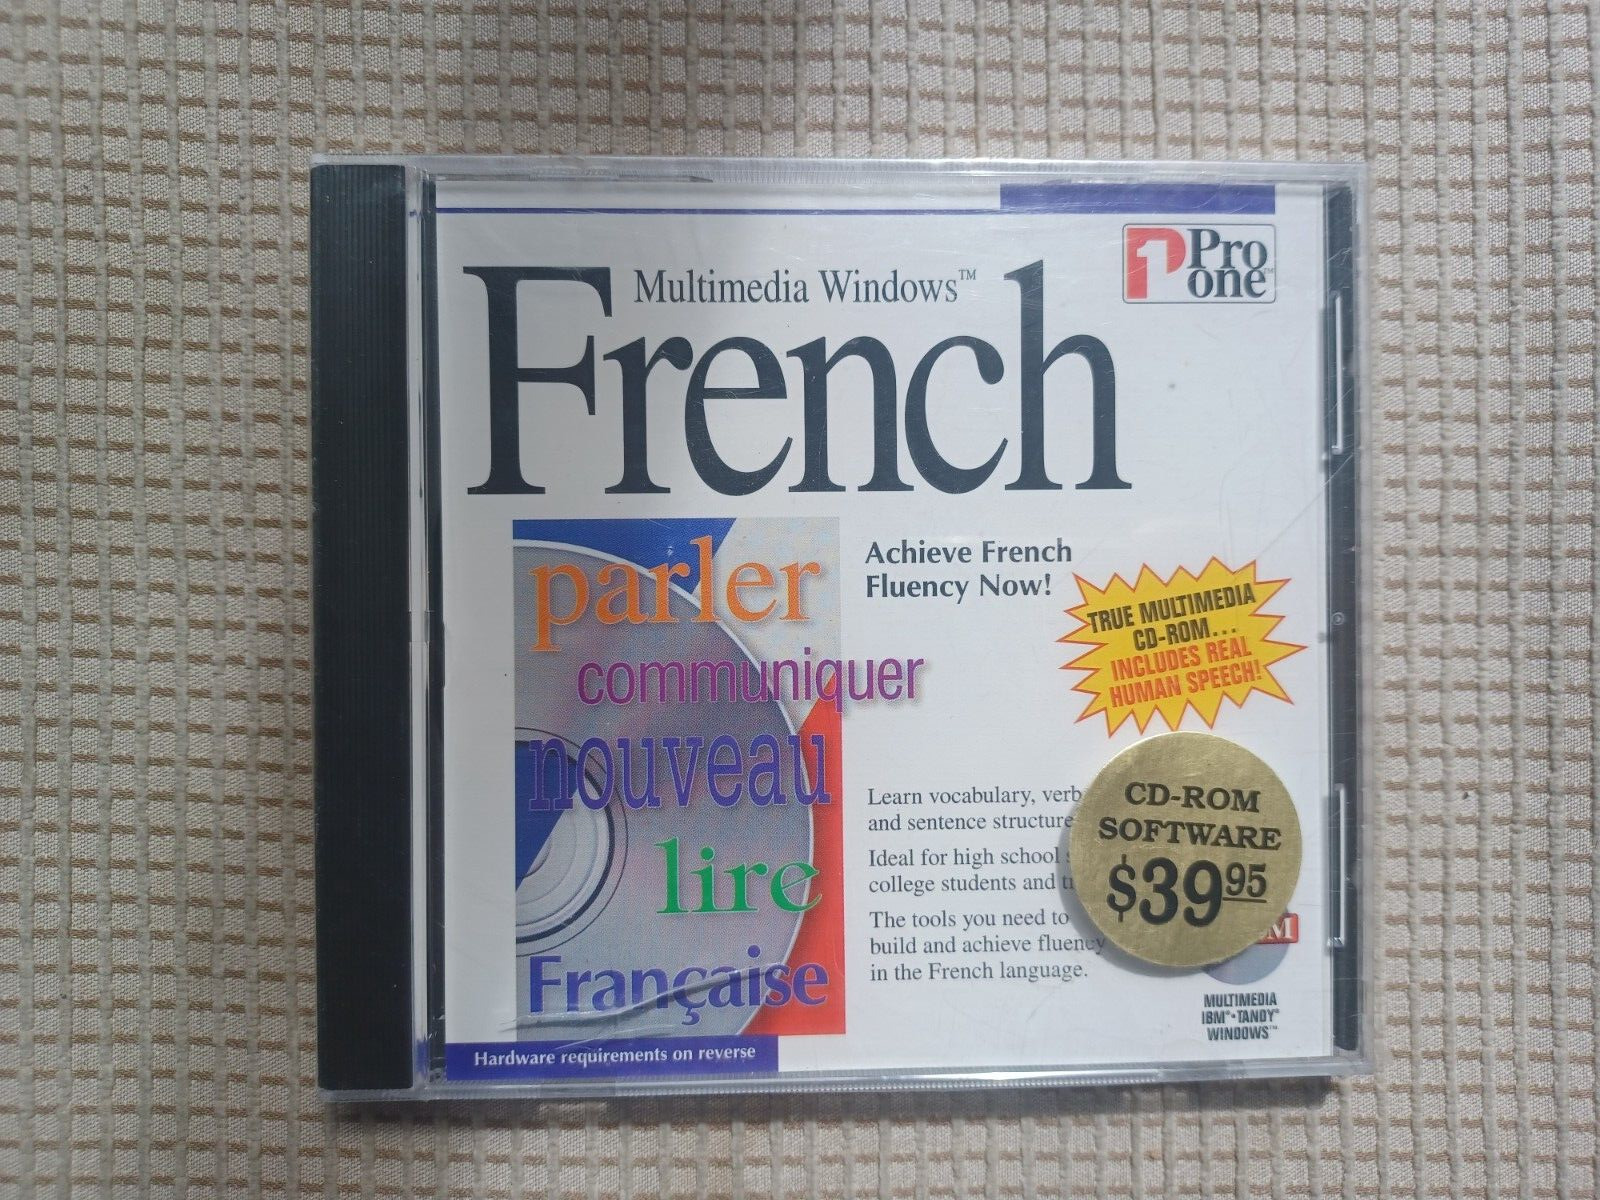 Pro One Multimedia  FRENCH, (PC, Cd--Rom, IBM )[Win 3.1, Win95] New & Sealed